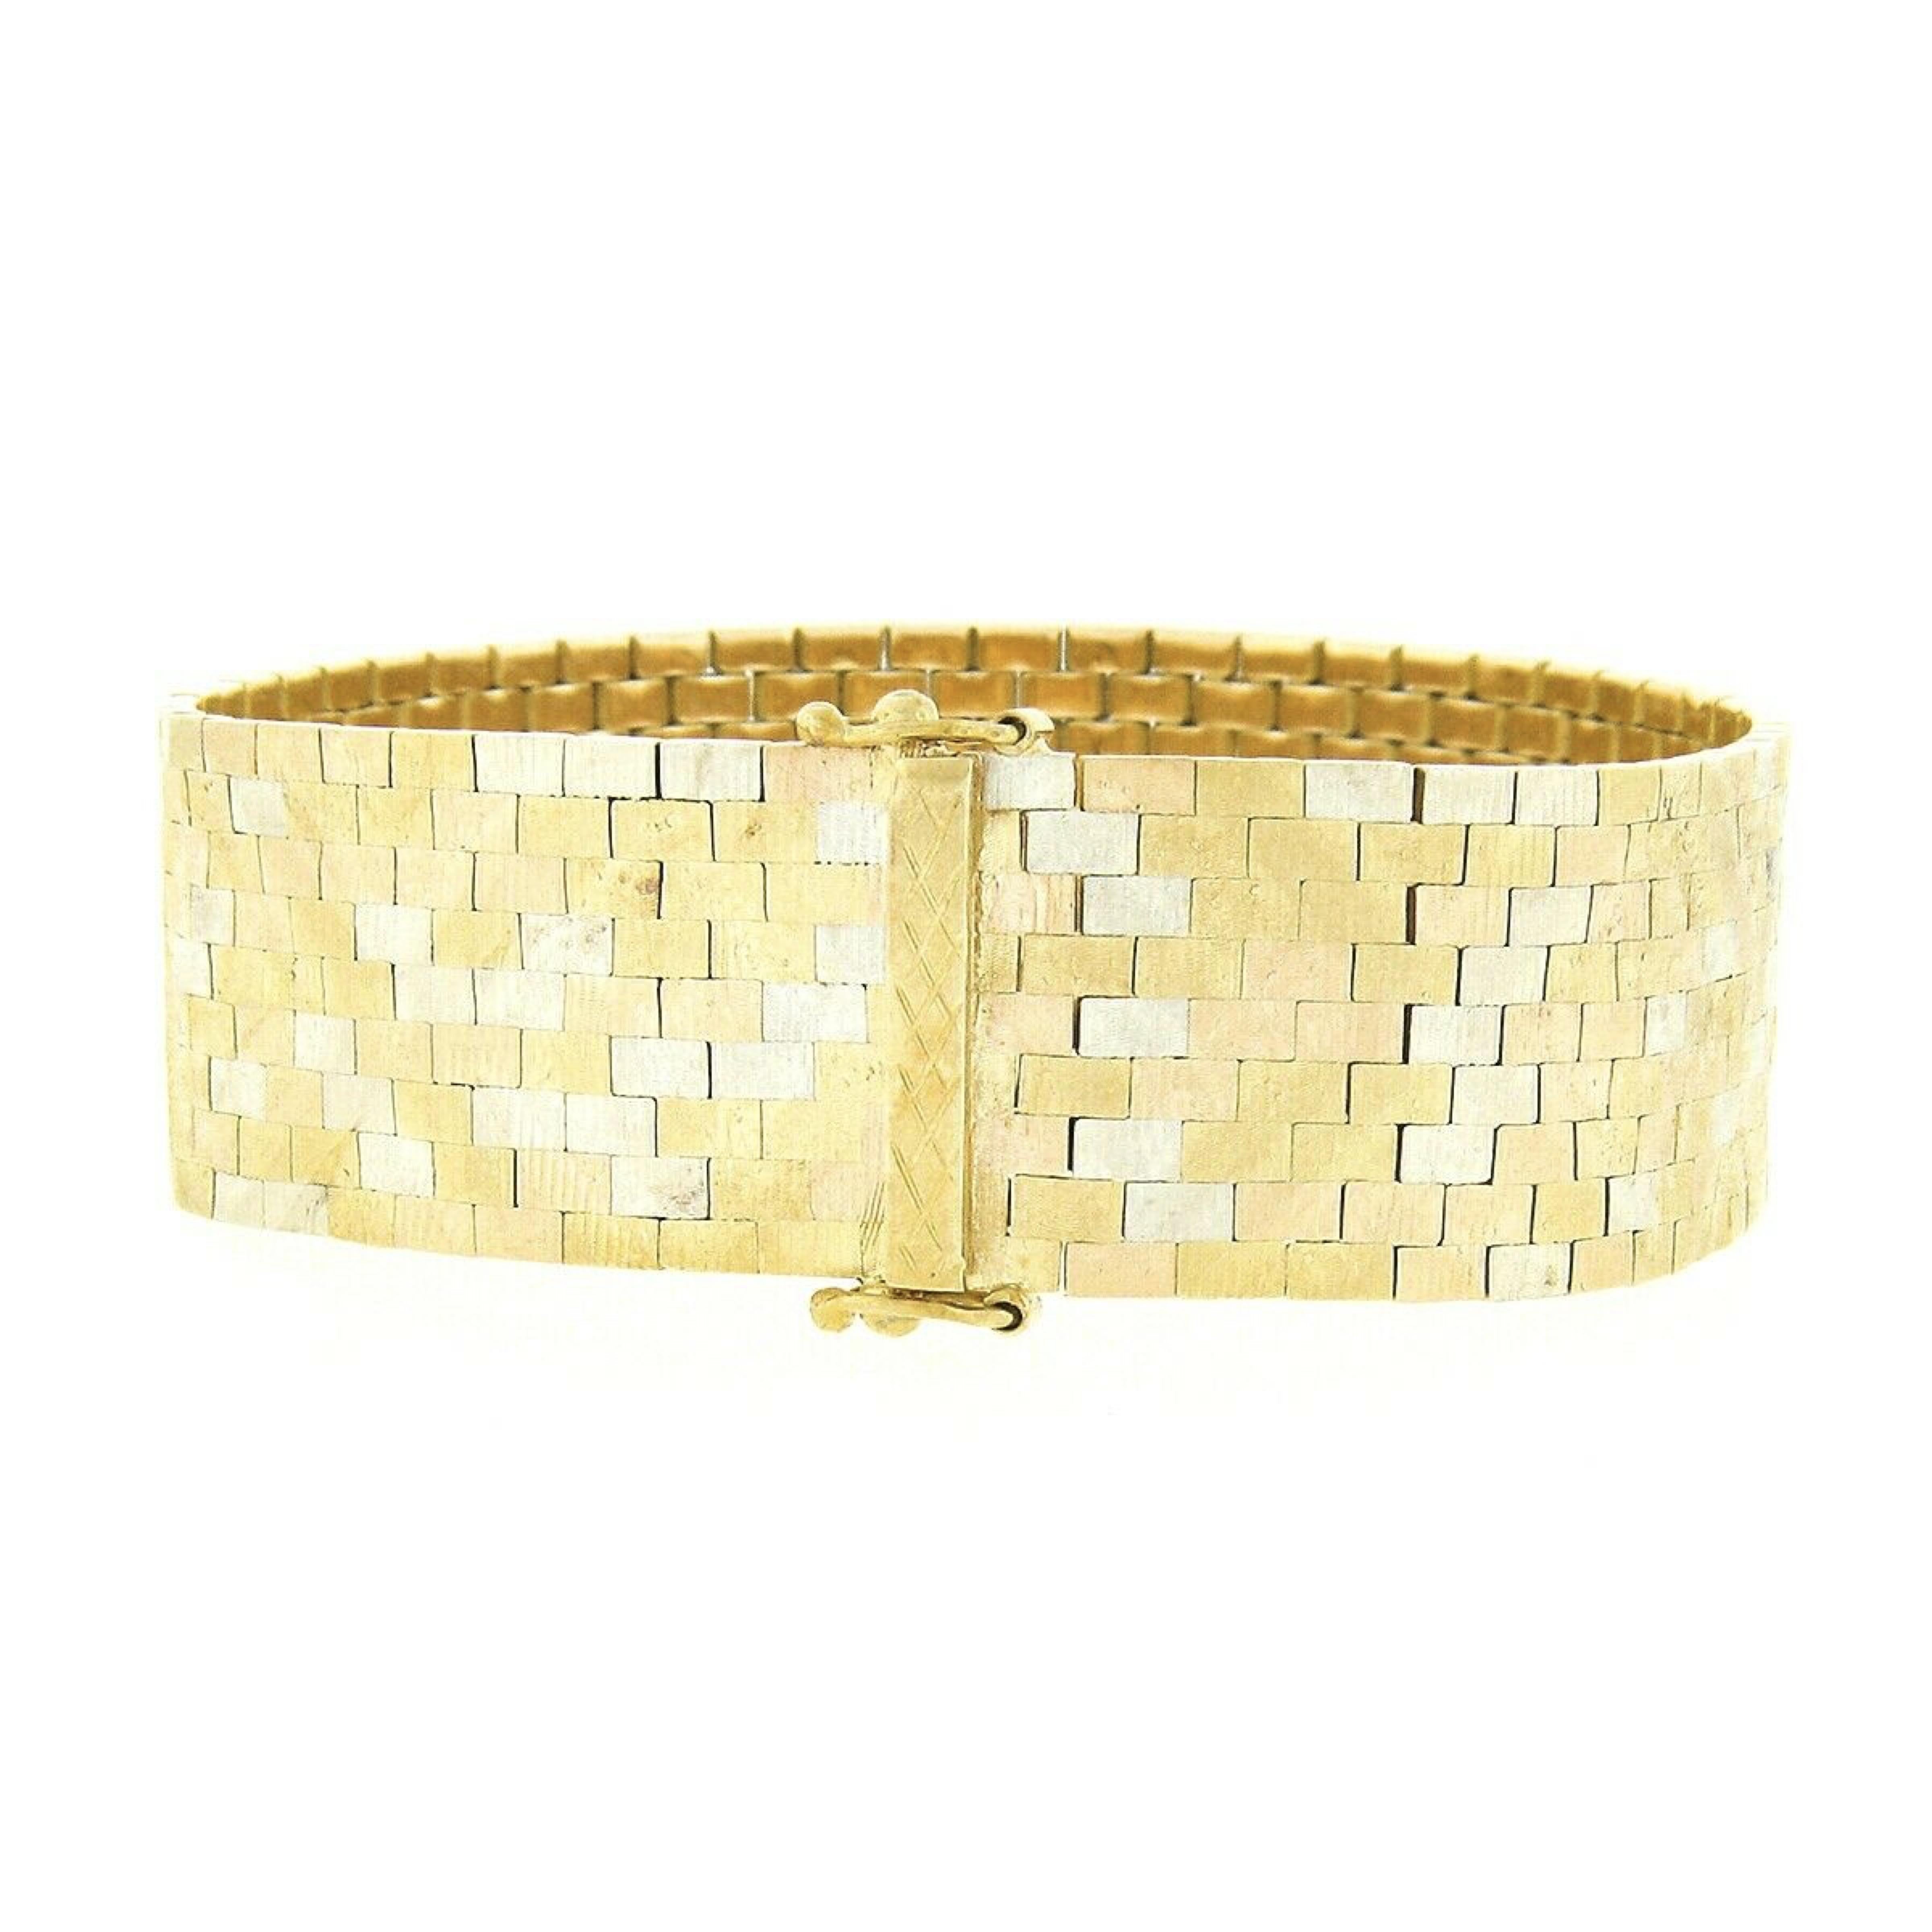 This gorgeous strap bracelet was designed by Corletto and crafted in Italy from solid 18k yellow gold with white gold accents featuring links set in a unique brick pattern with a wonderful textured finish throughout. The links come together on this